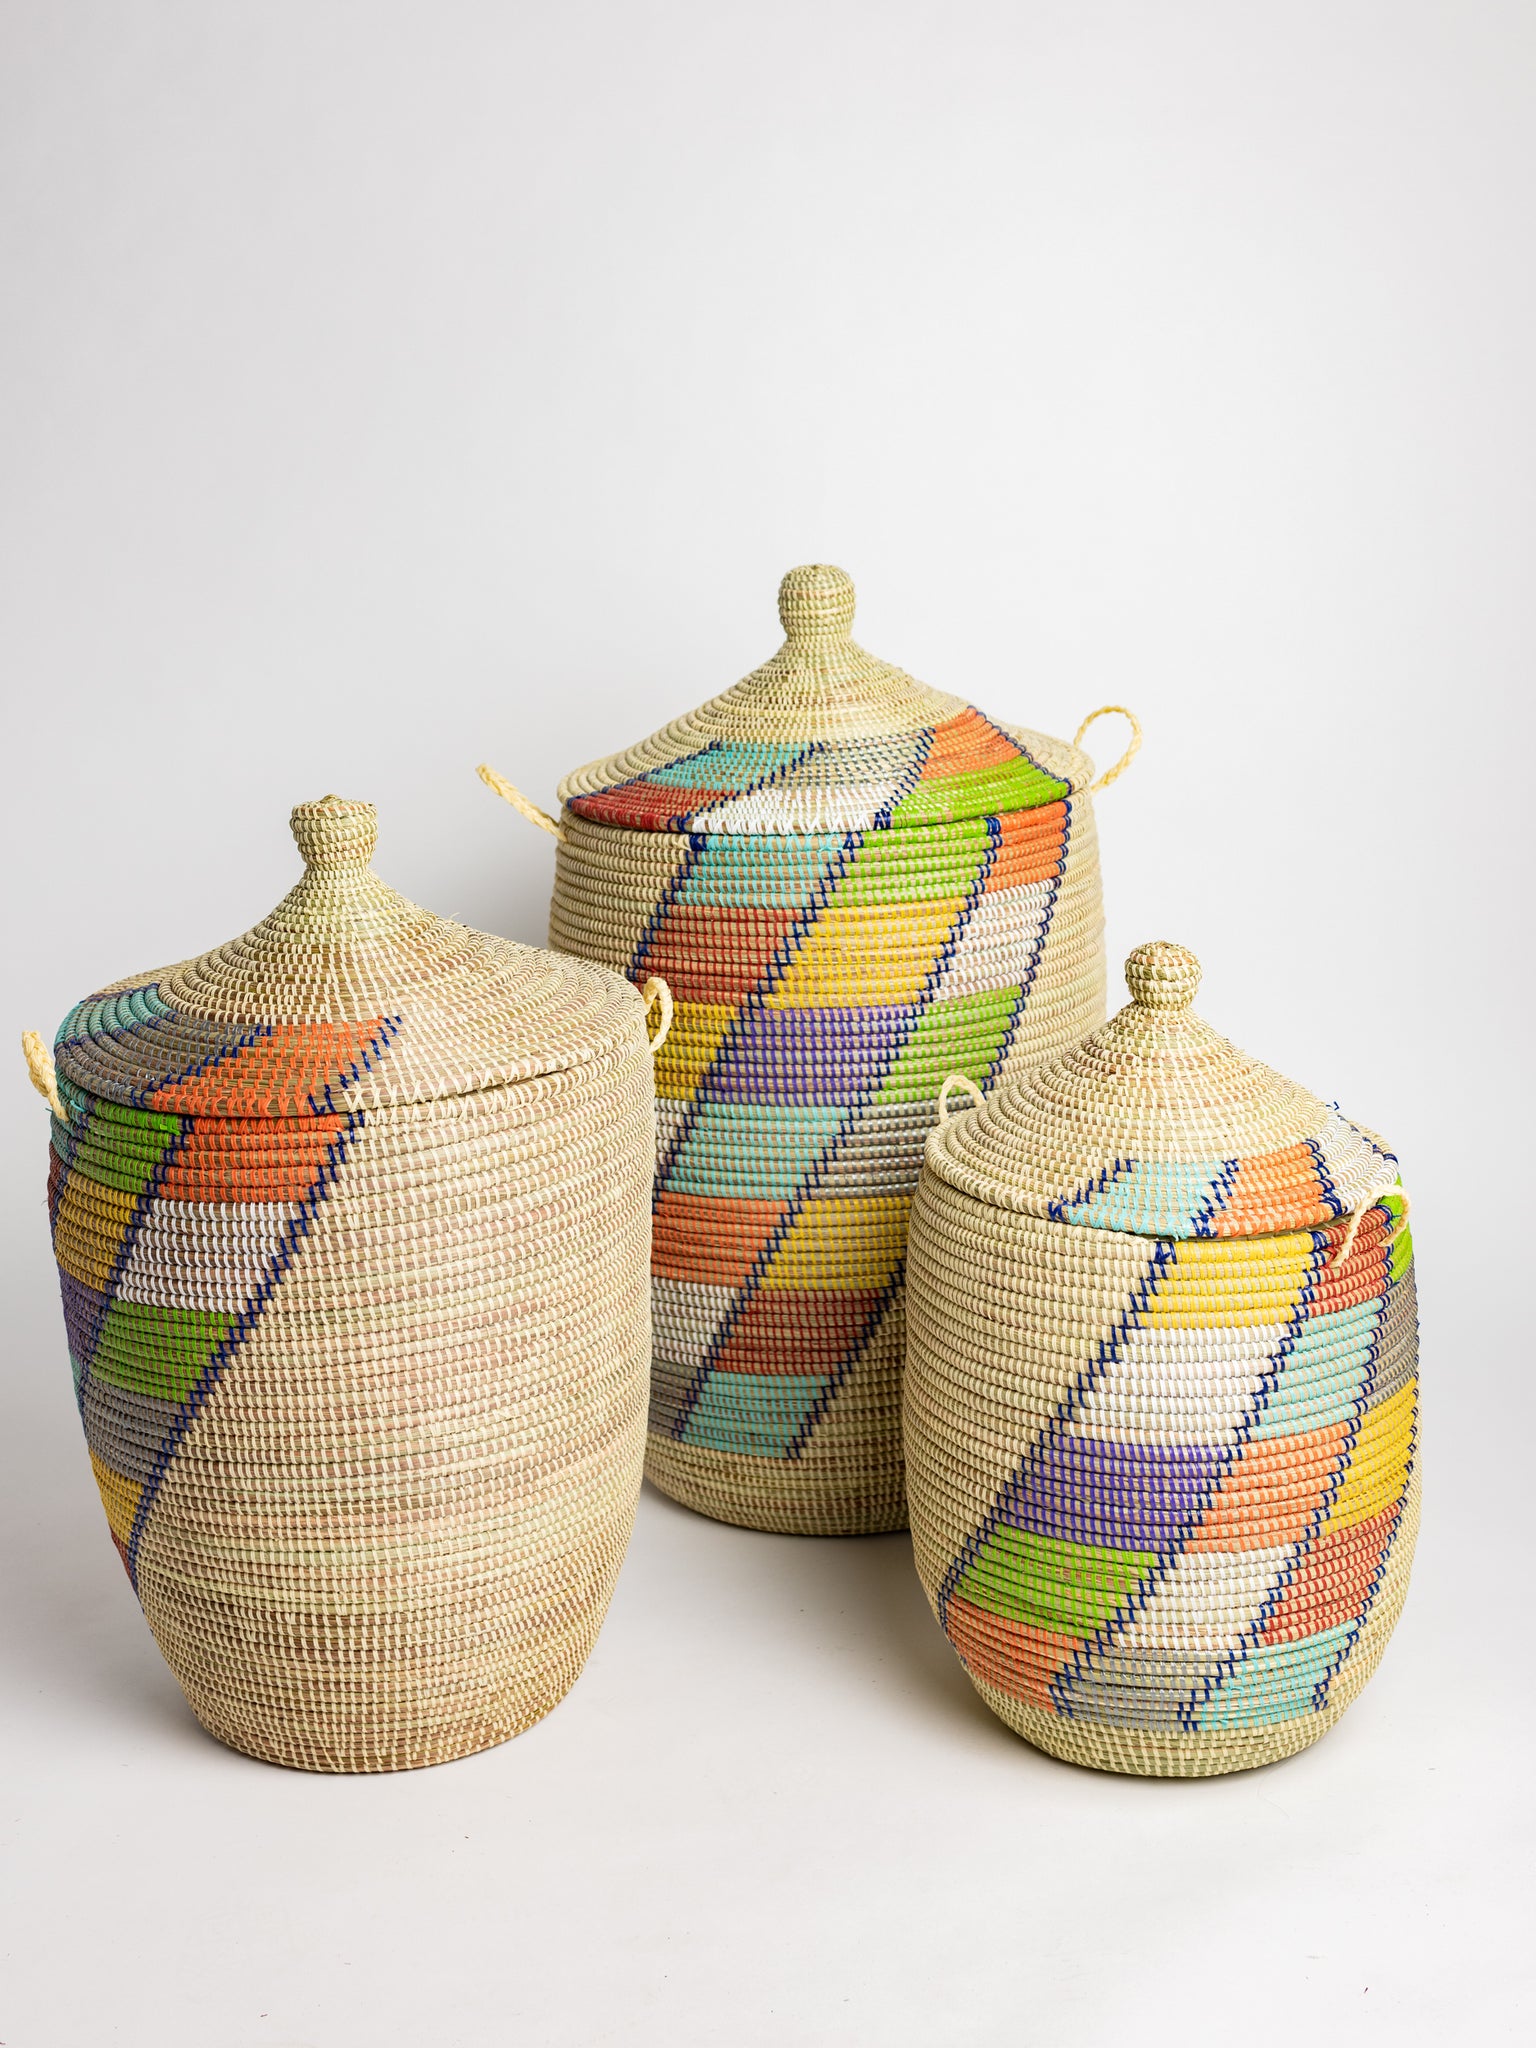 3 baskets - 3 nesting sizes with color detail from West African artists